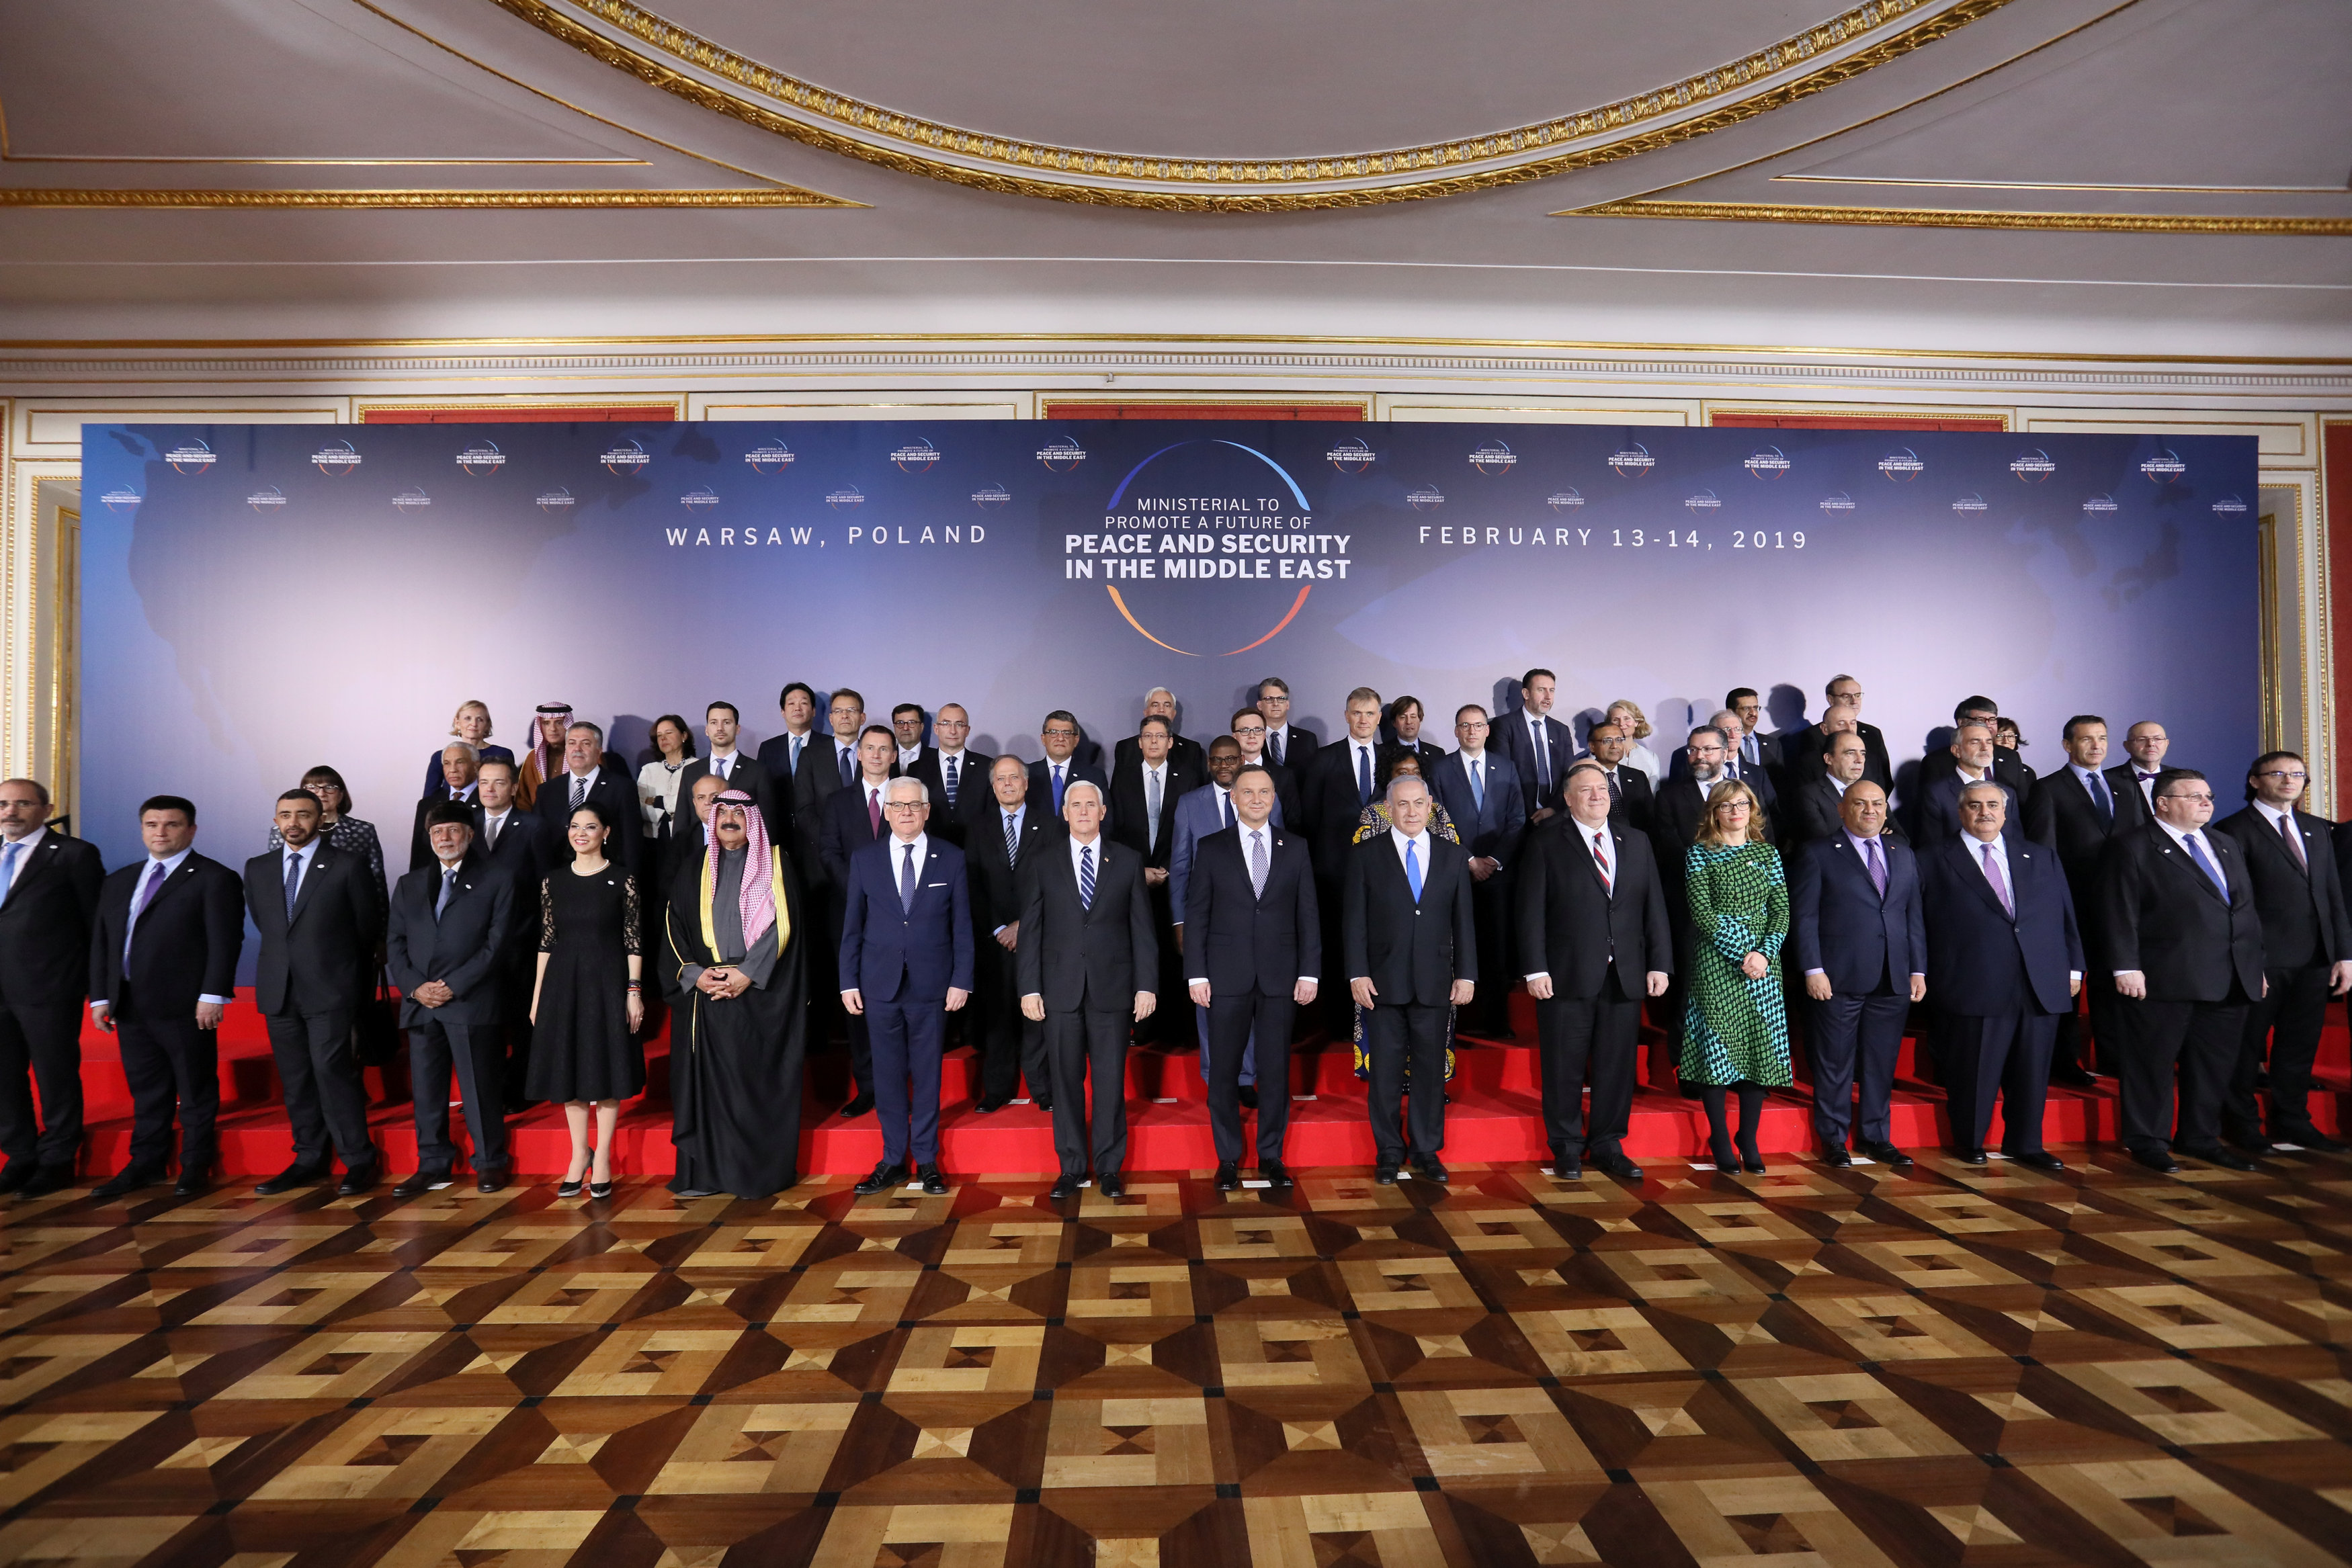 Participants pose for family photo at the Middle East conference at the Royal Castle in Warsaw